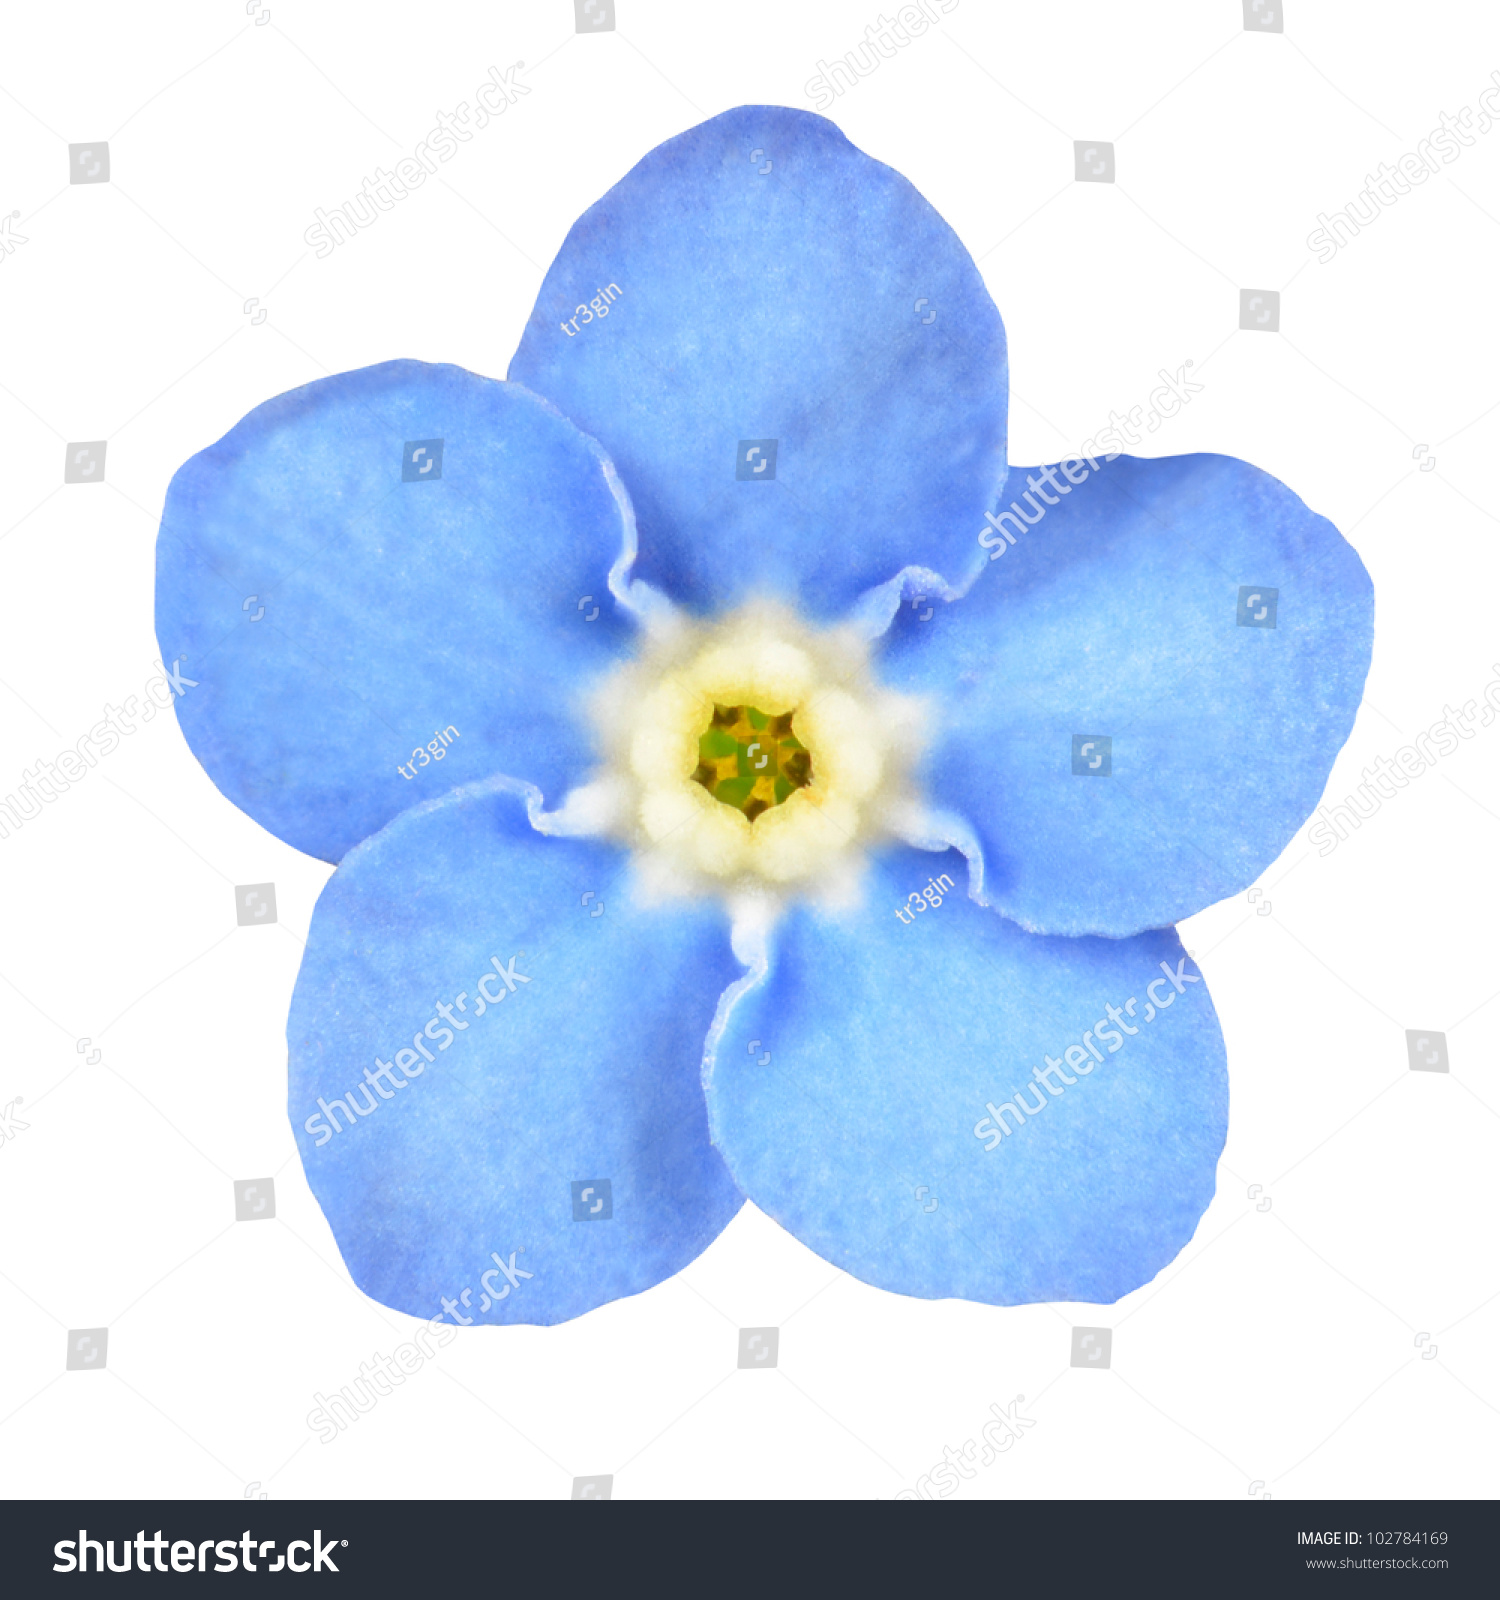 Royalty-free Forget-me-not Light Blue Flower… #102784169 Stock Photo ...